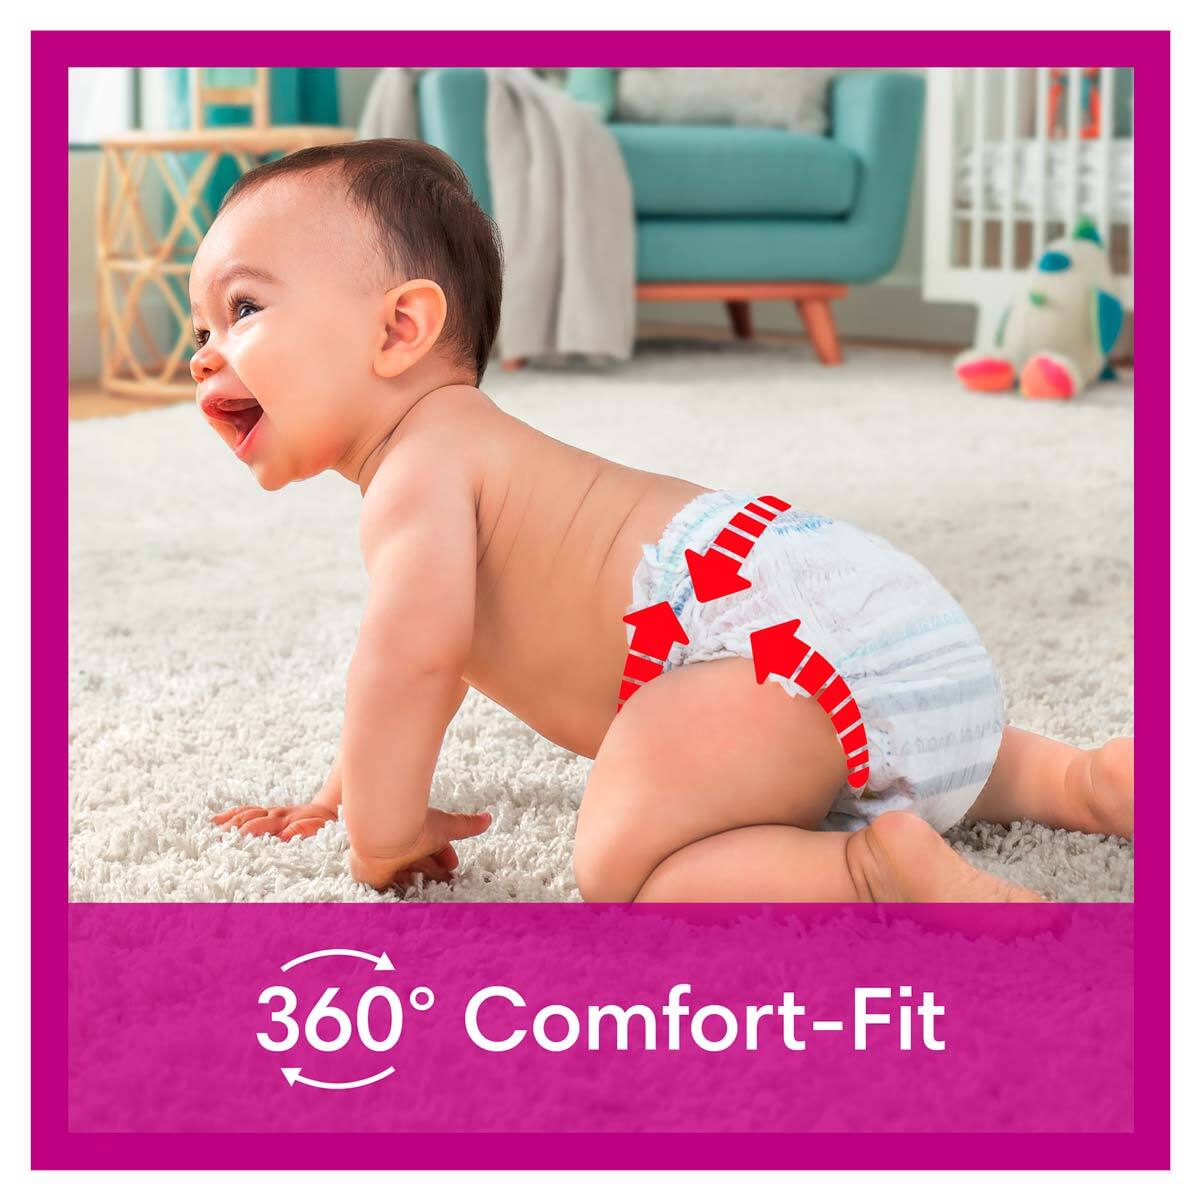 Pampers Active Fit Nappy Pants Size 5, 32 x Monthly 136 Pack